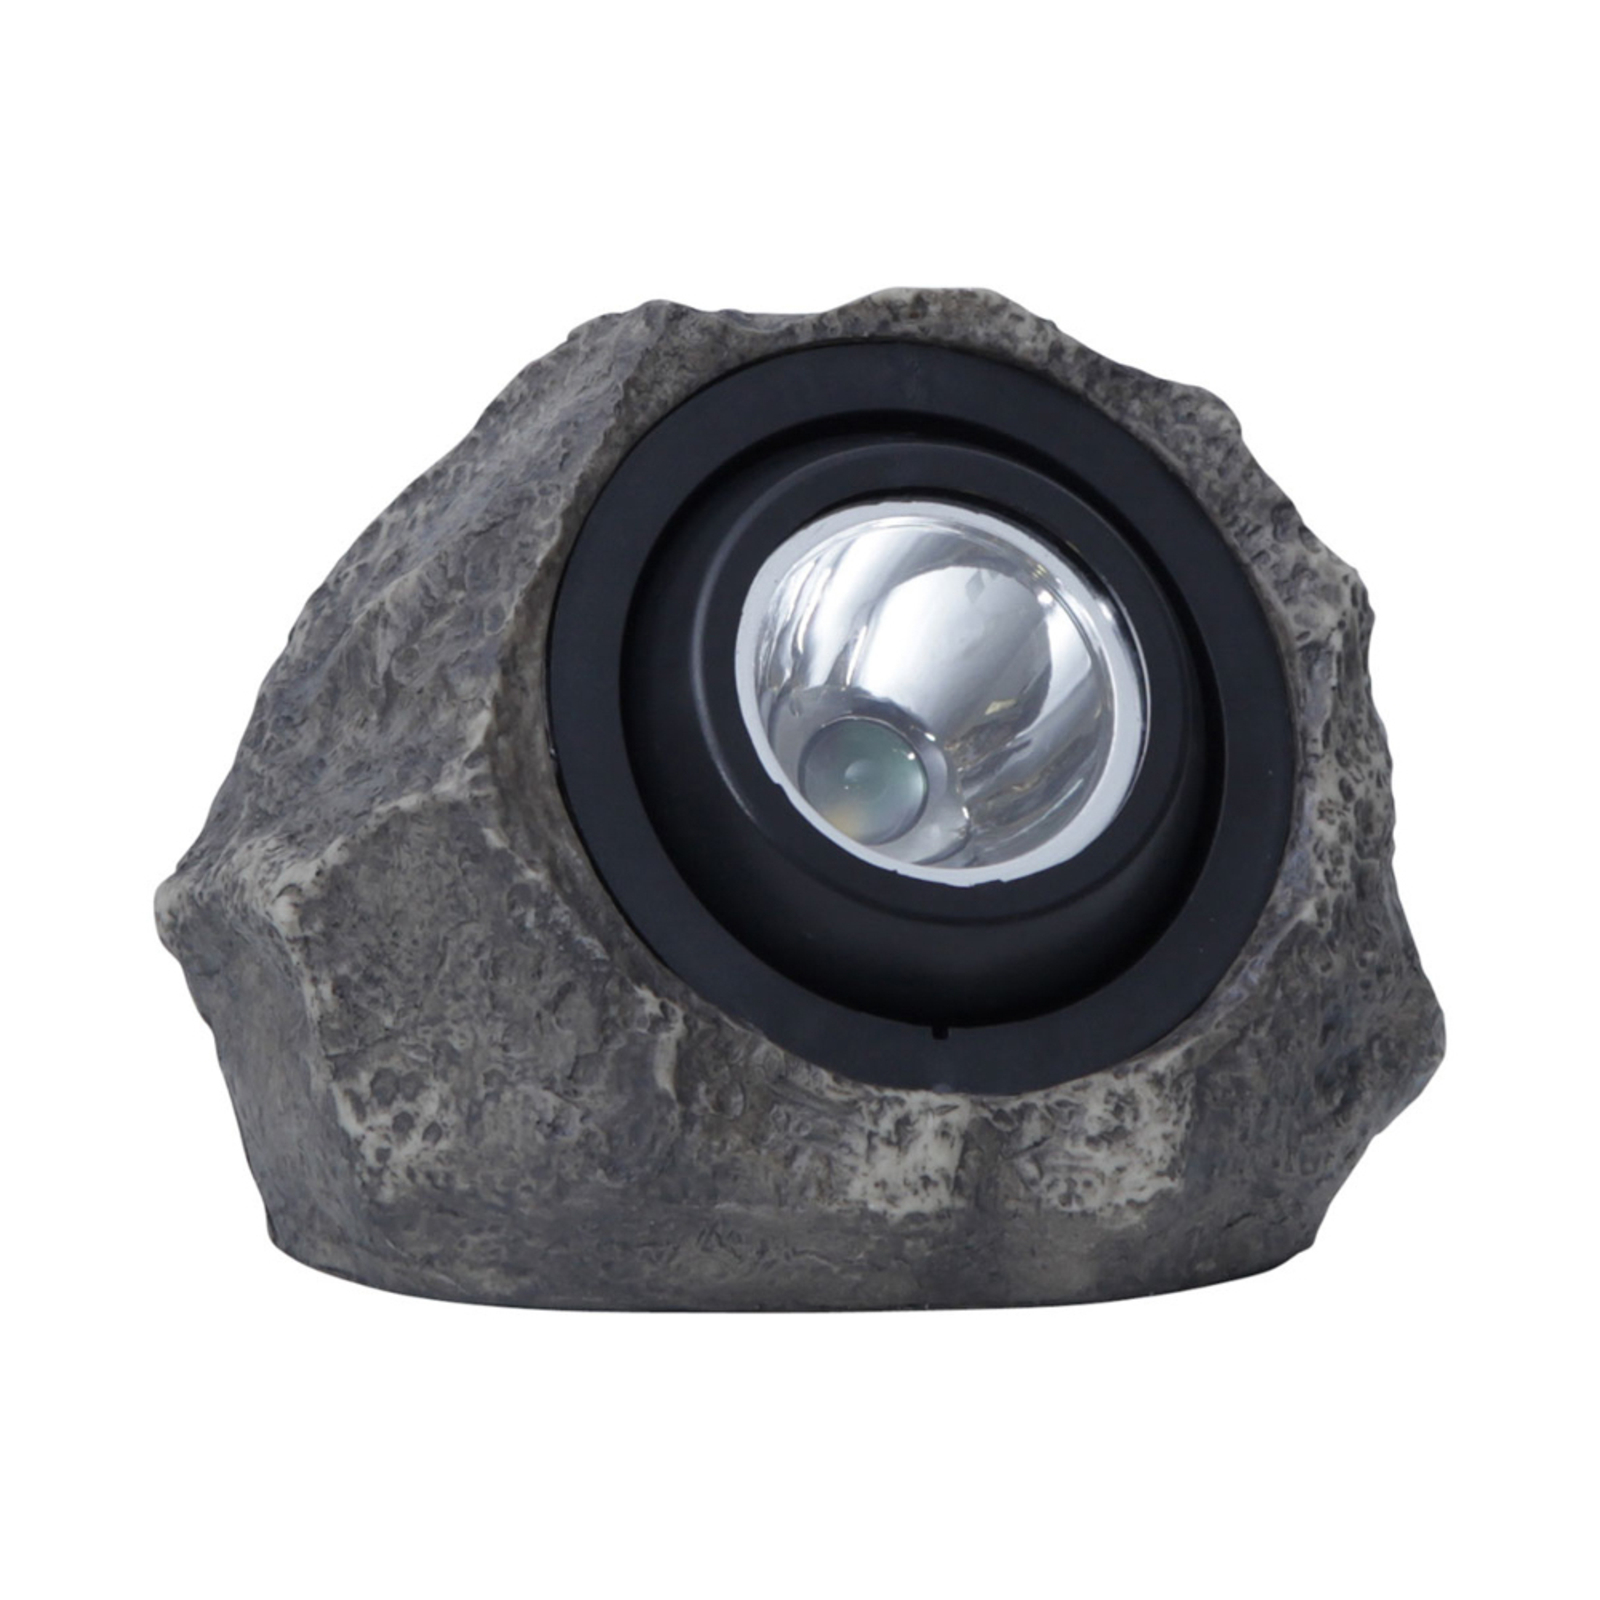 Lampe solaire LED Rocky, orientable